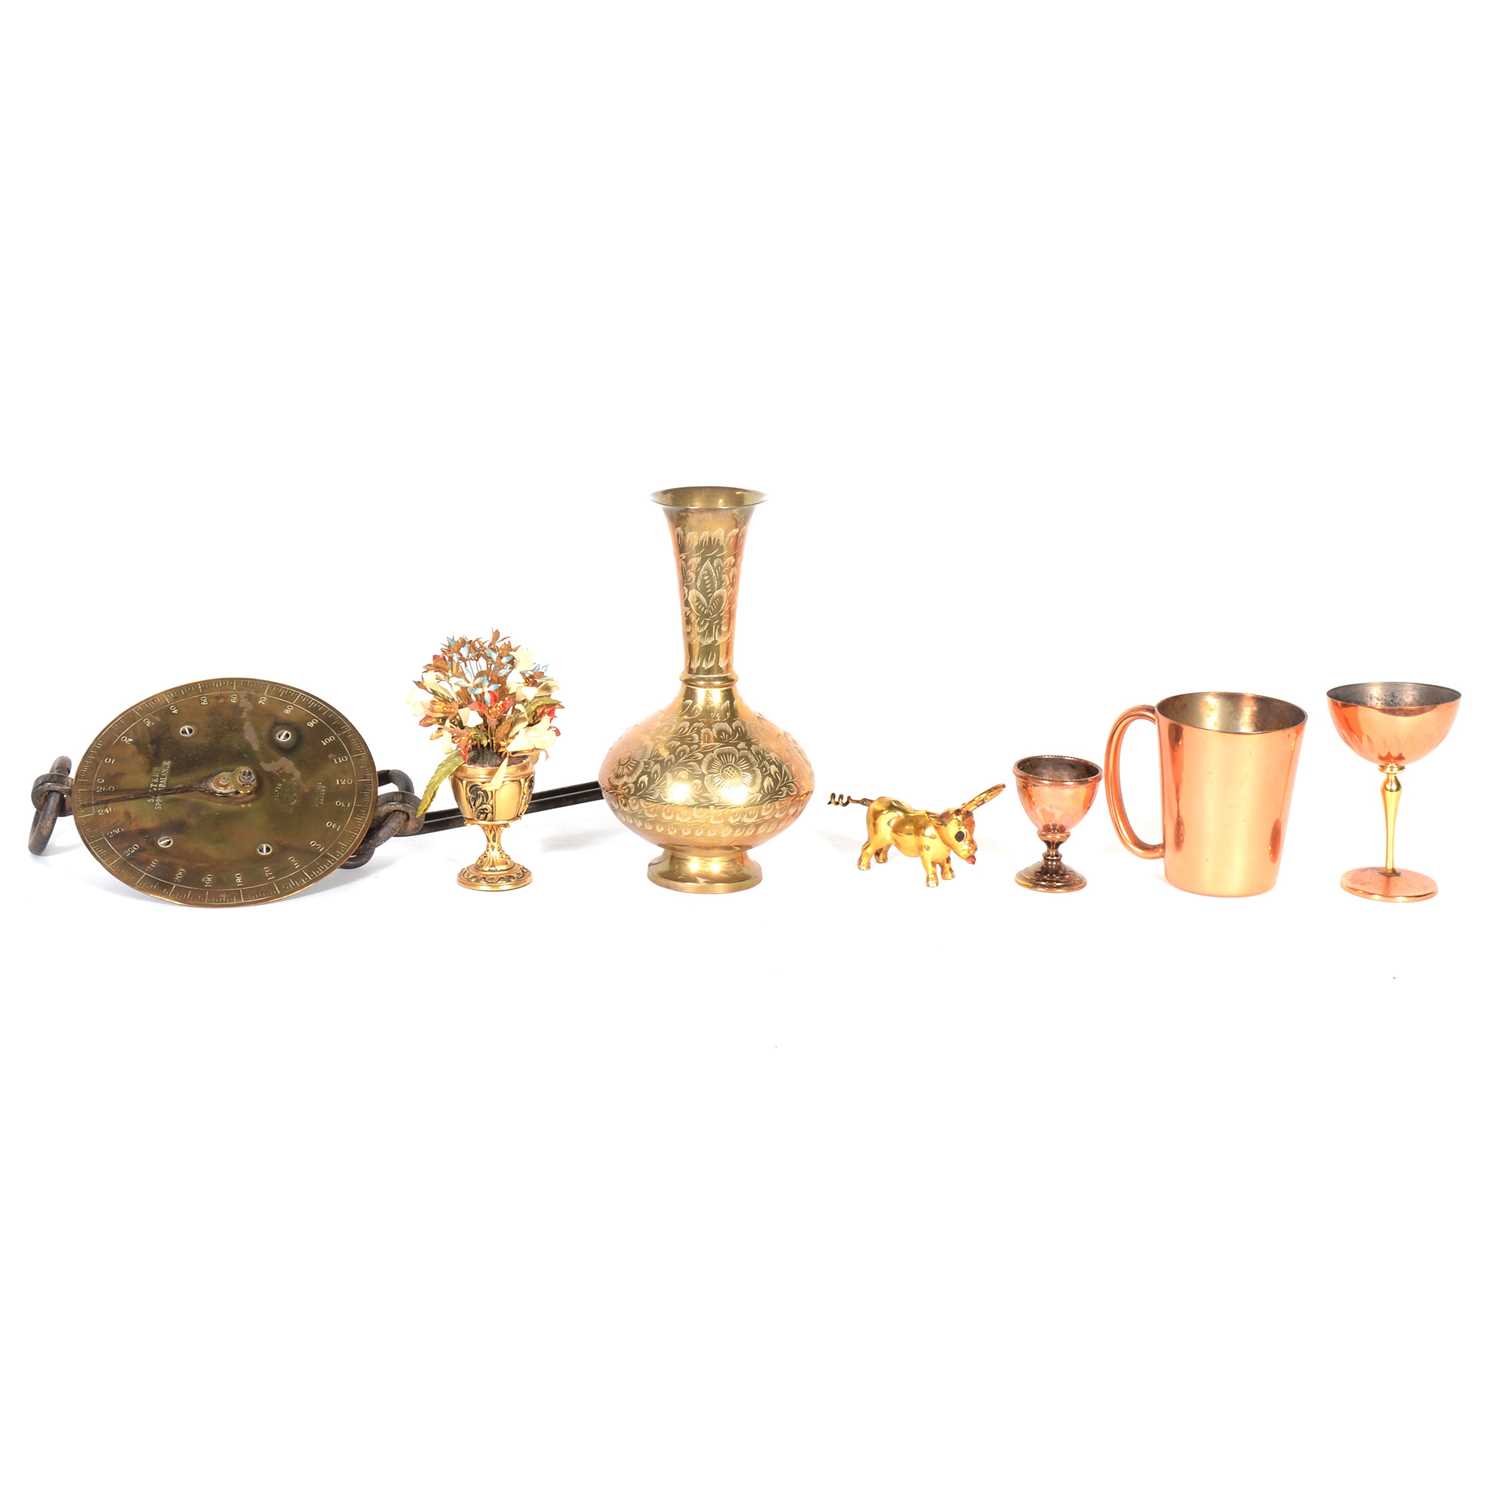 Lot 130 - A collection of brass and copper wares